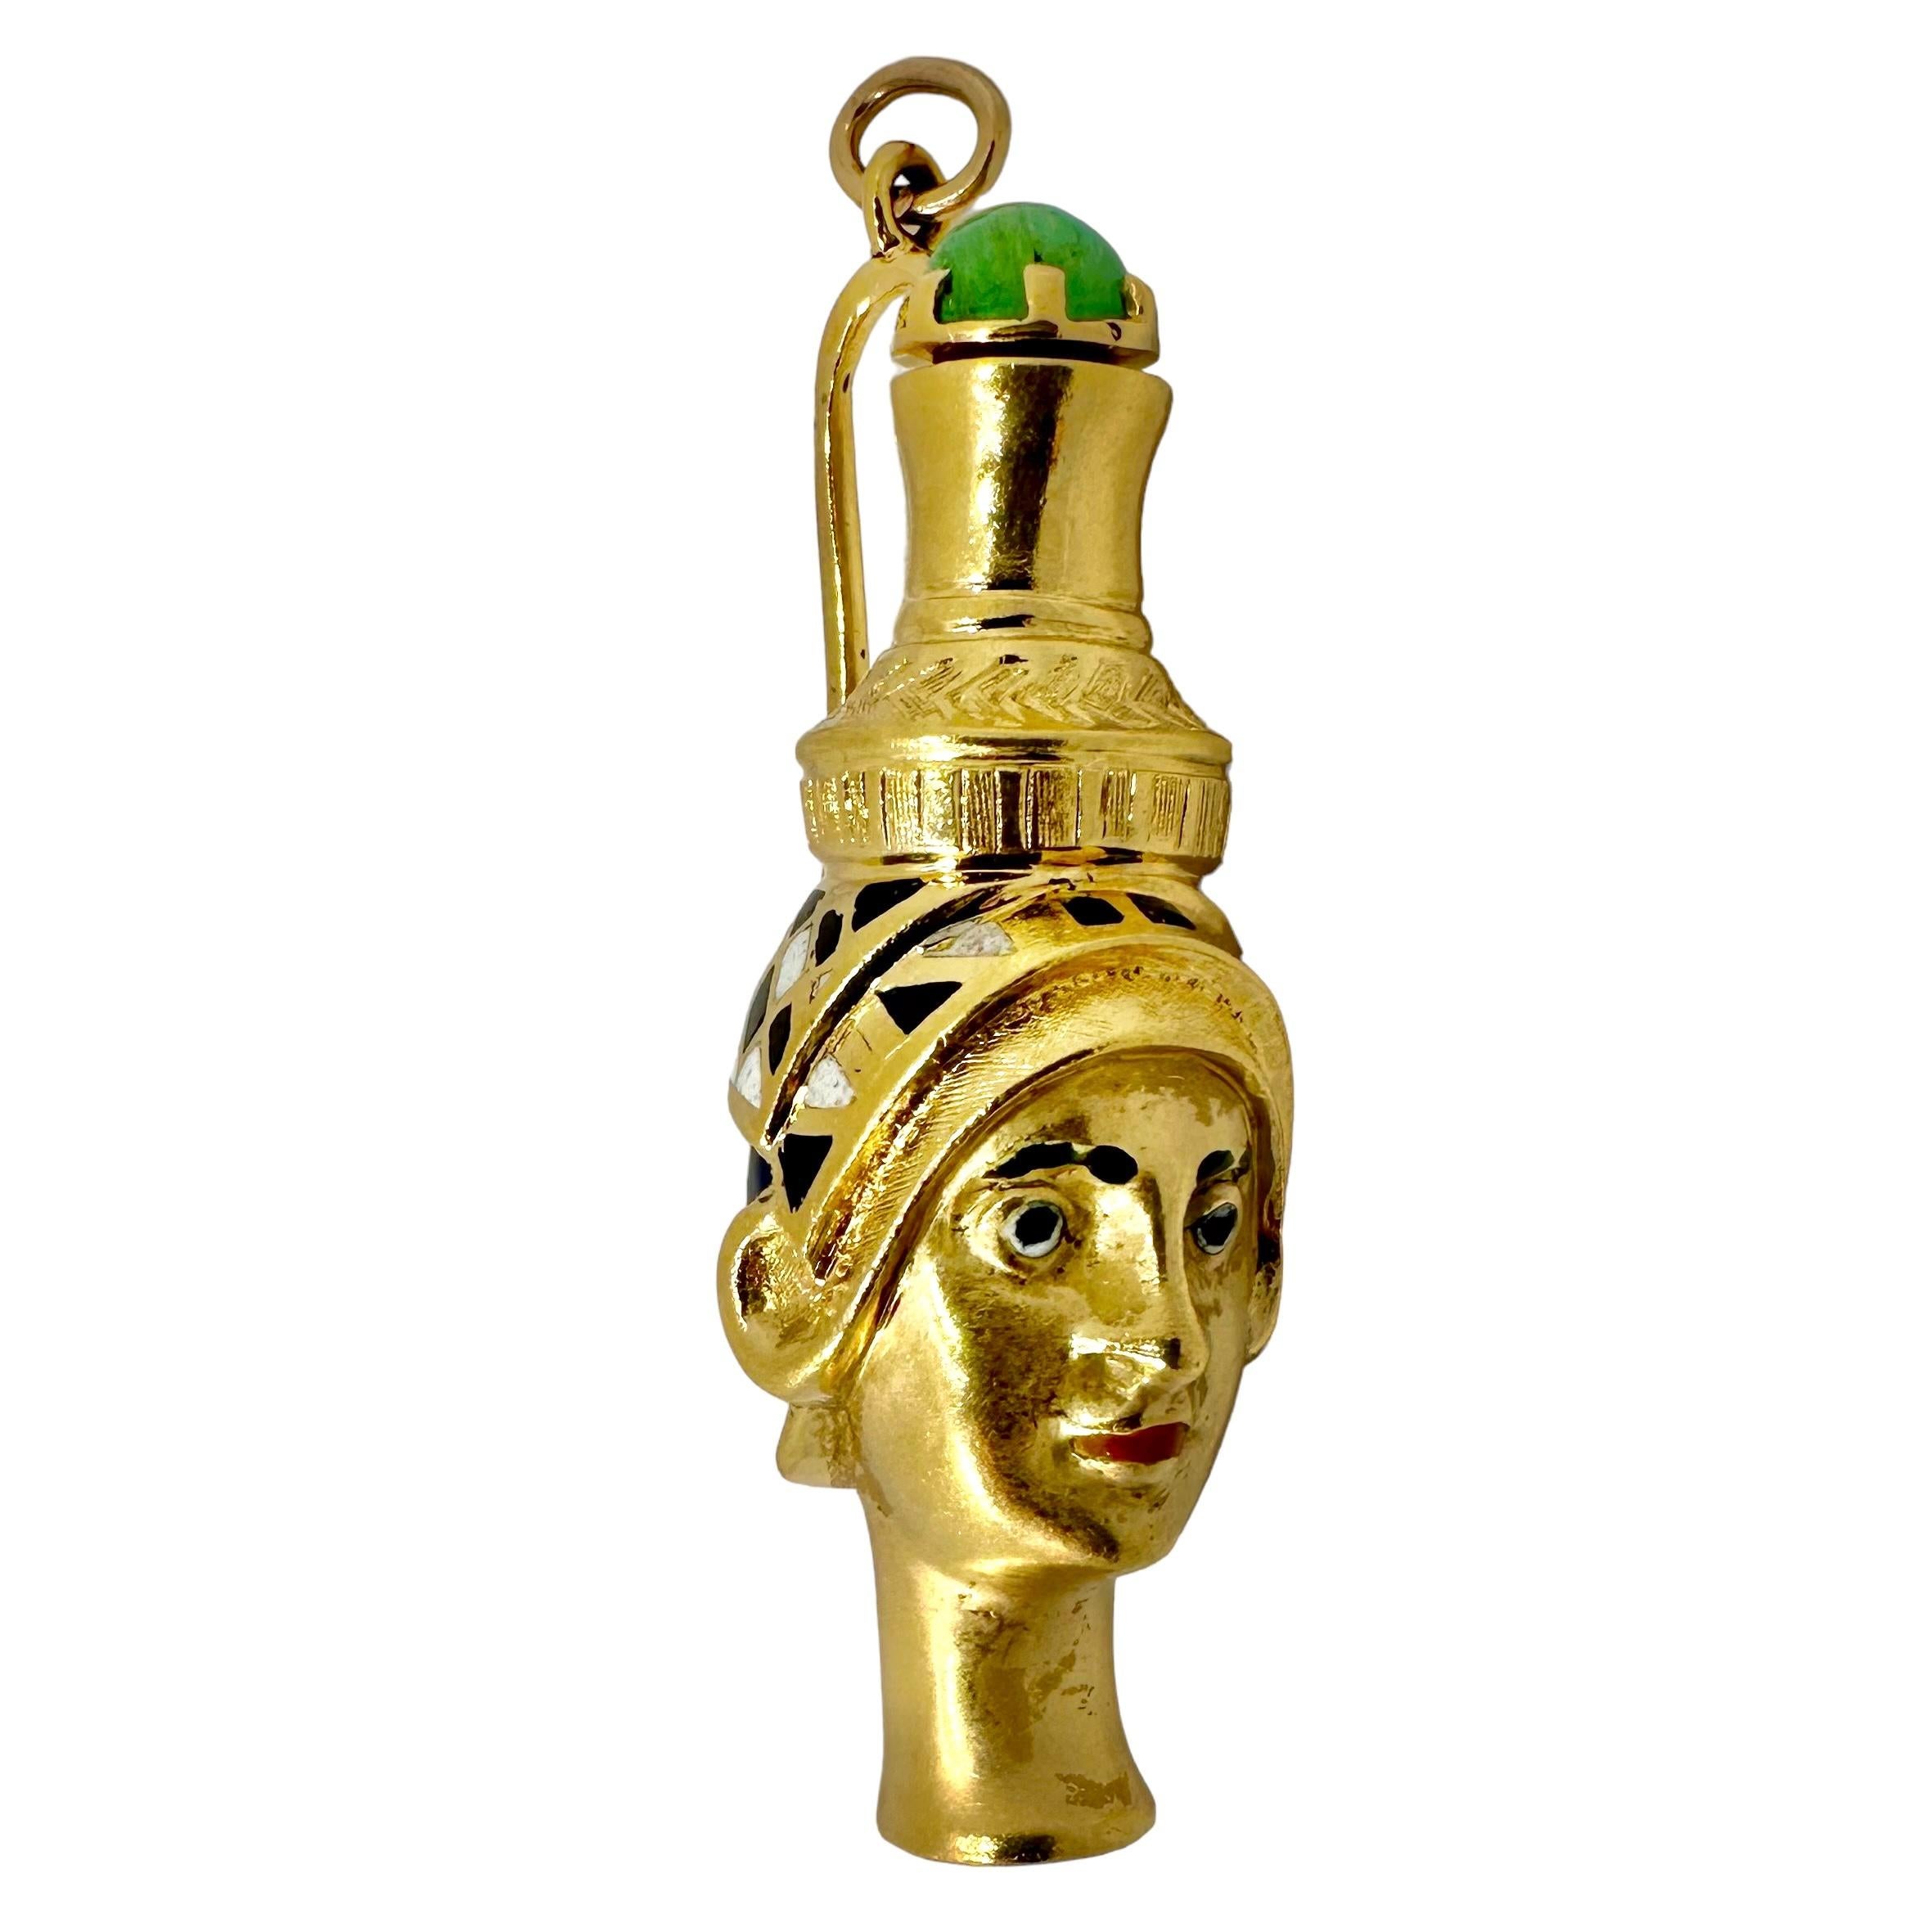 Cabochon Positively Unique Vintage Gold Italian Vintage Egyptian Themed Perfume Amulet For Sale